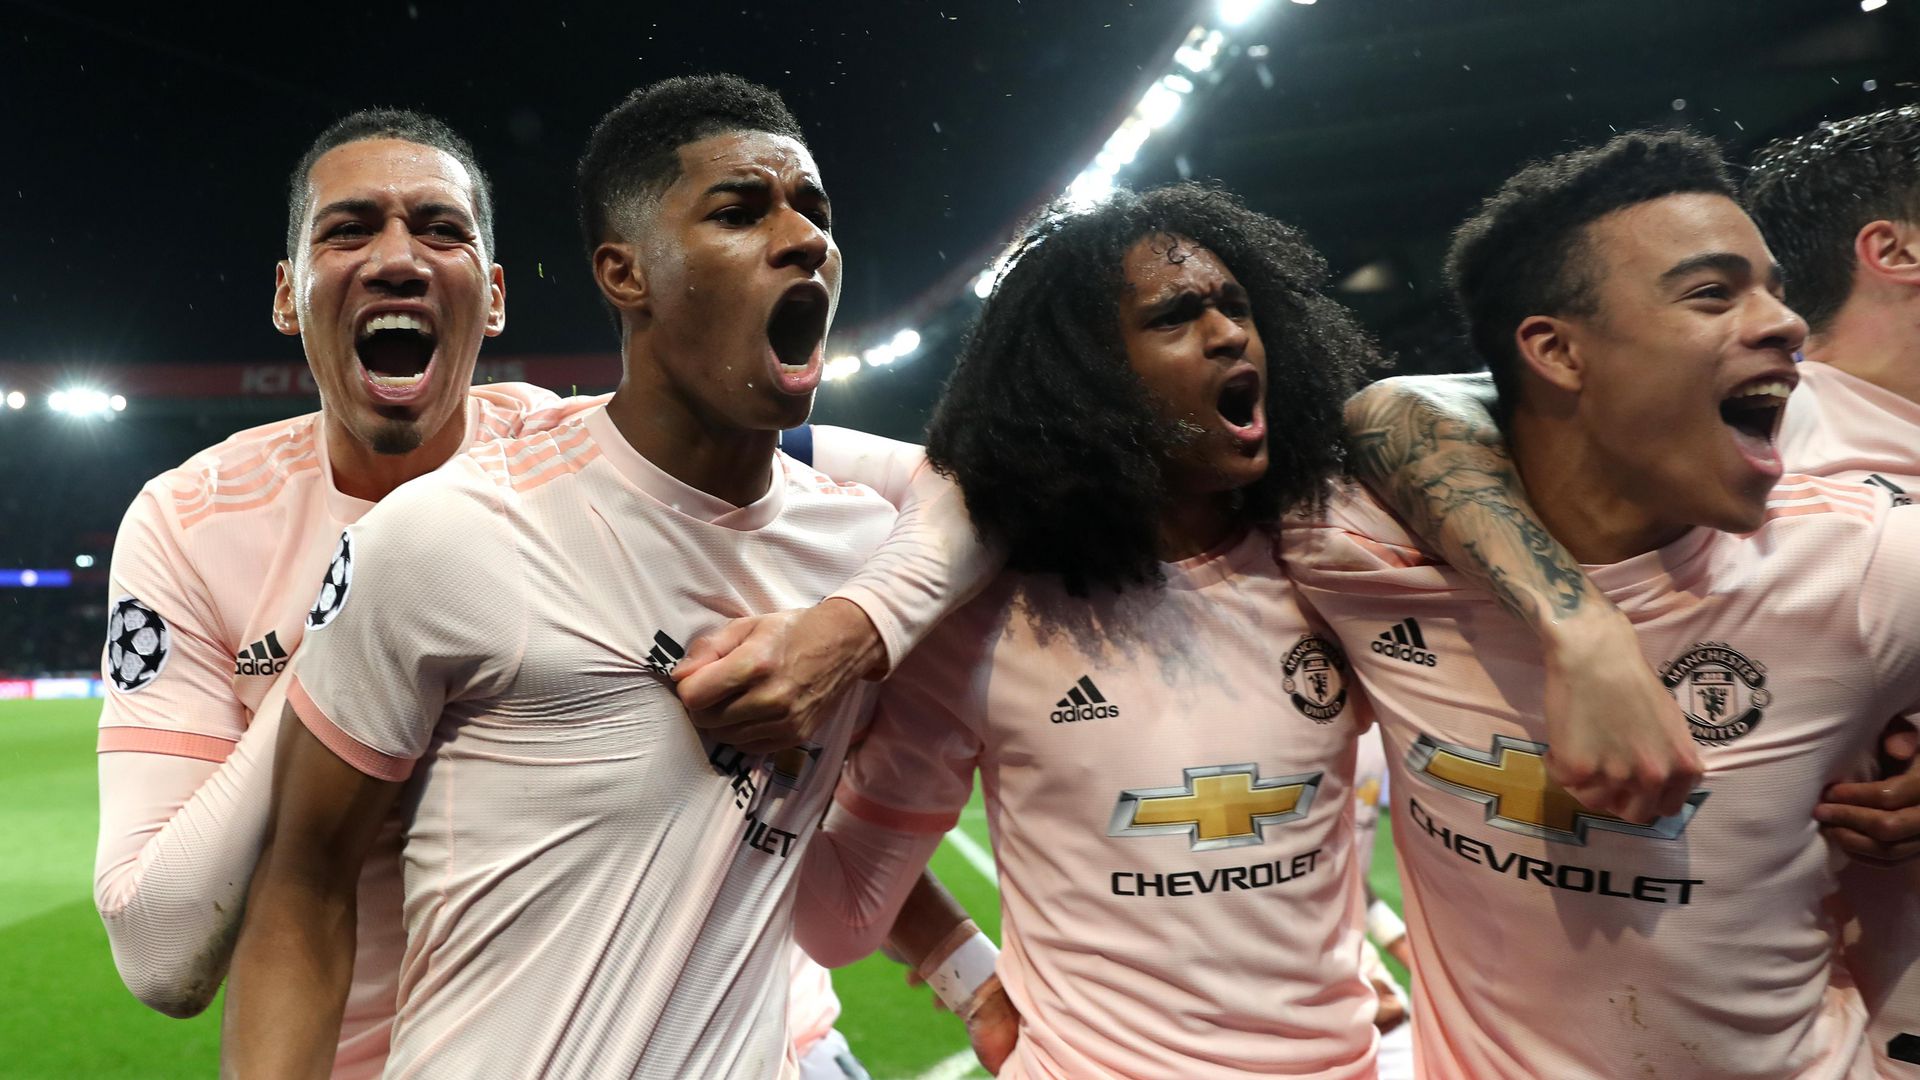 Man Utd Vs Psg 2-1 - 10 Stand Out Stats From Man Utd S 2 1 Victory Over Psg In Paris / Rb leipzig istanbul basaksehir vs.